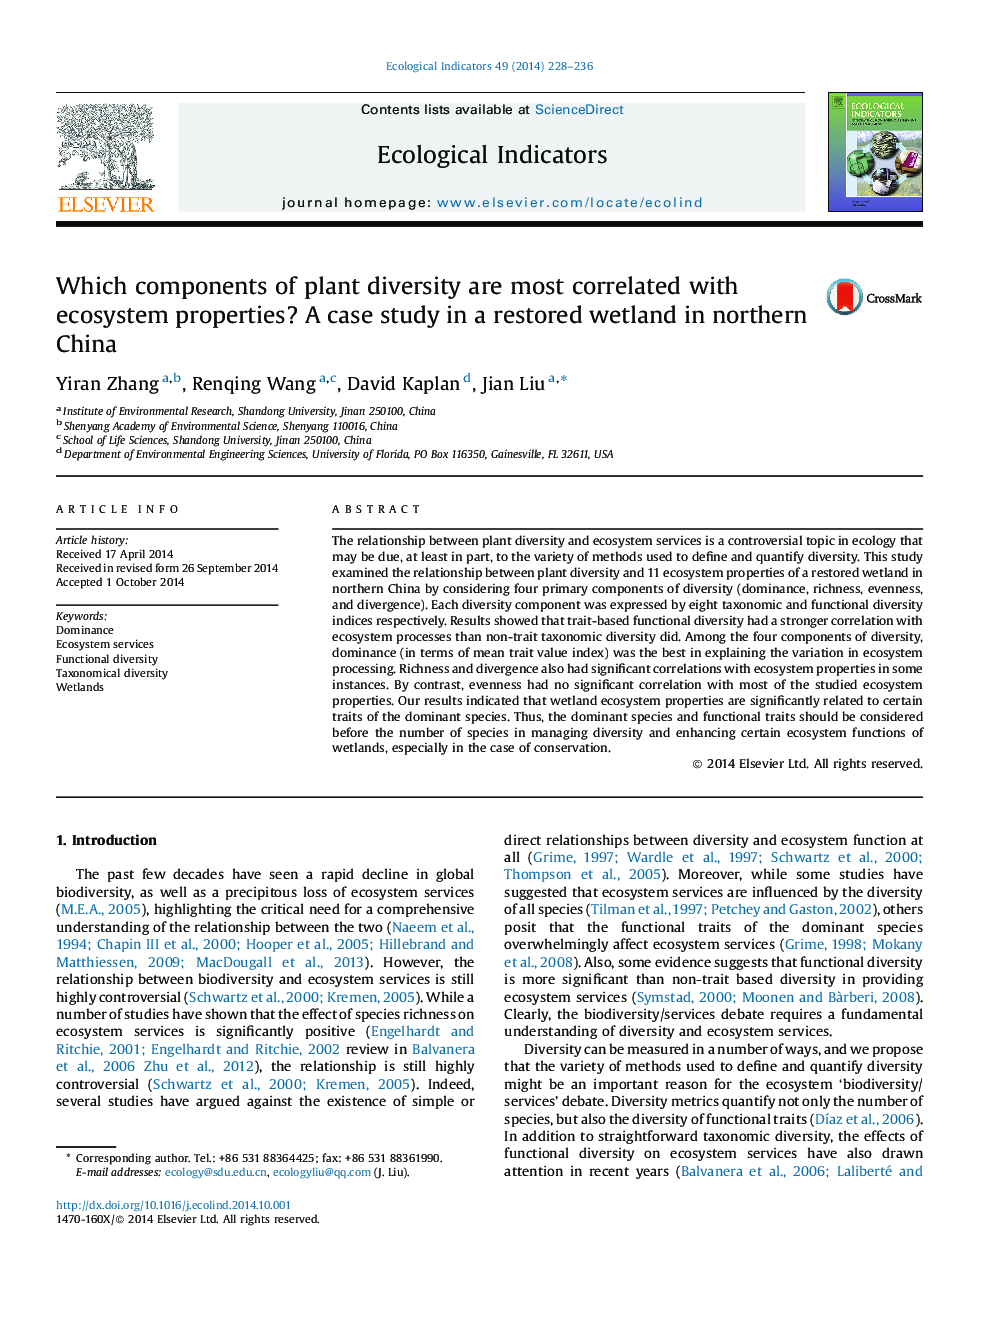 Which components of plant diversity are most correlated with ecosystem properties? A case study in a restored wetland in northern China